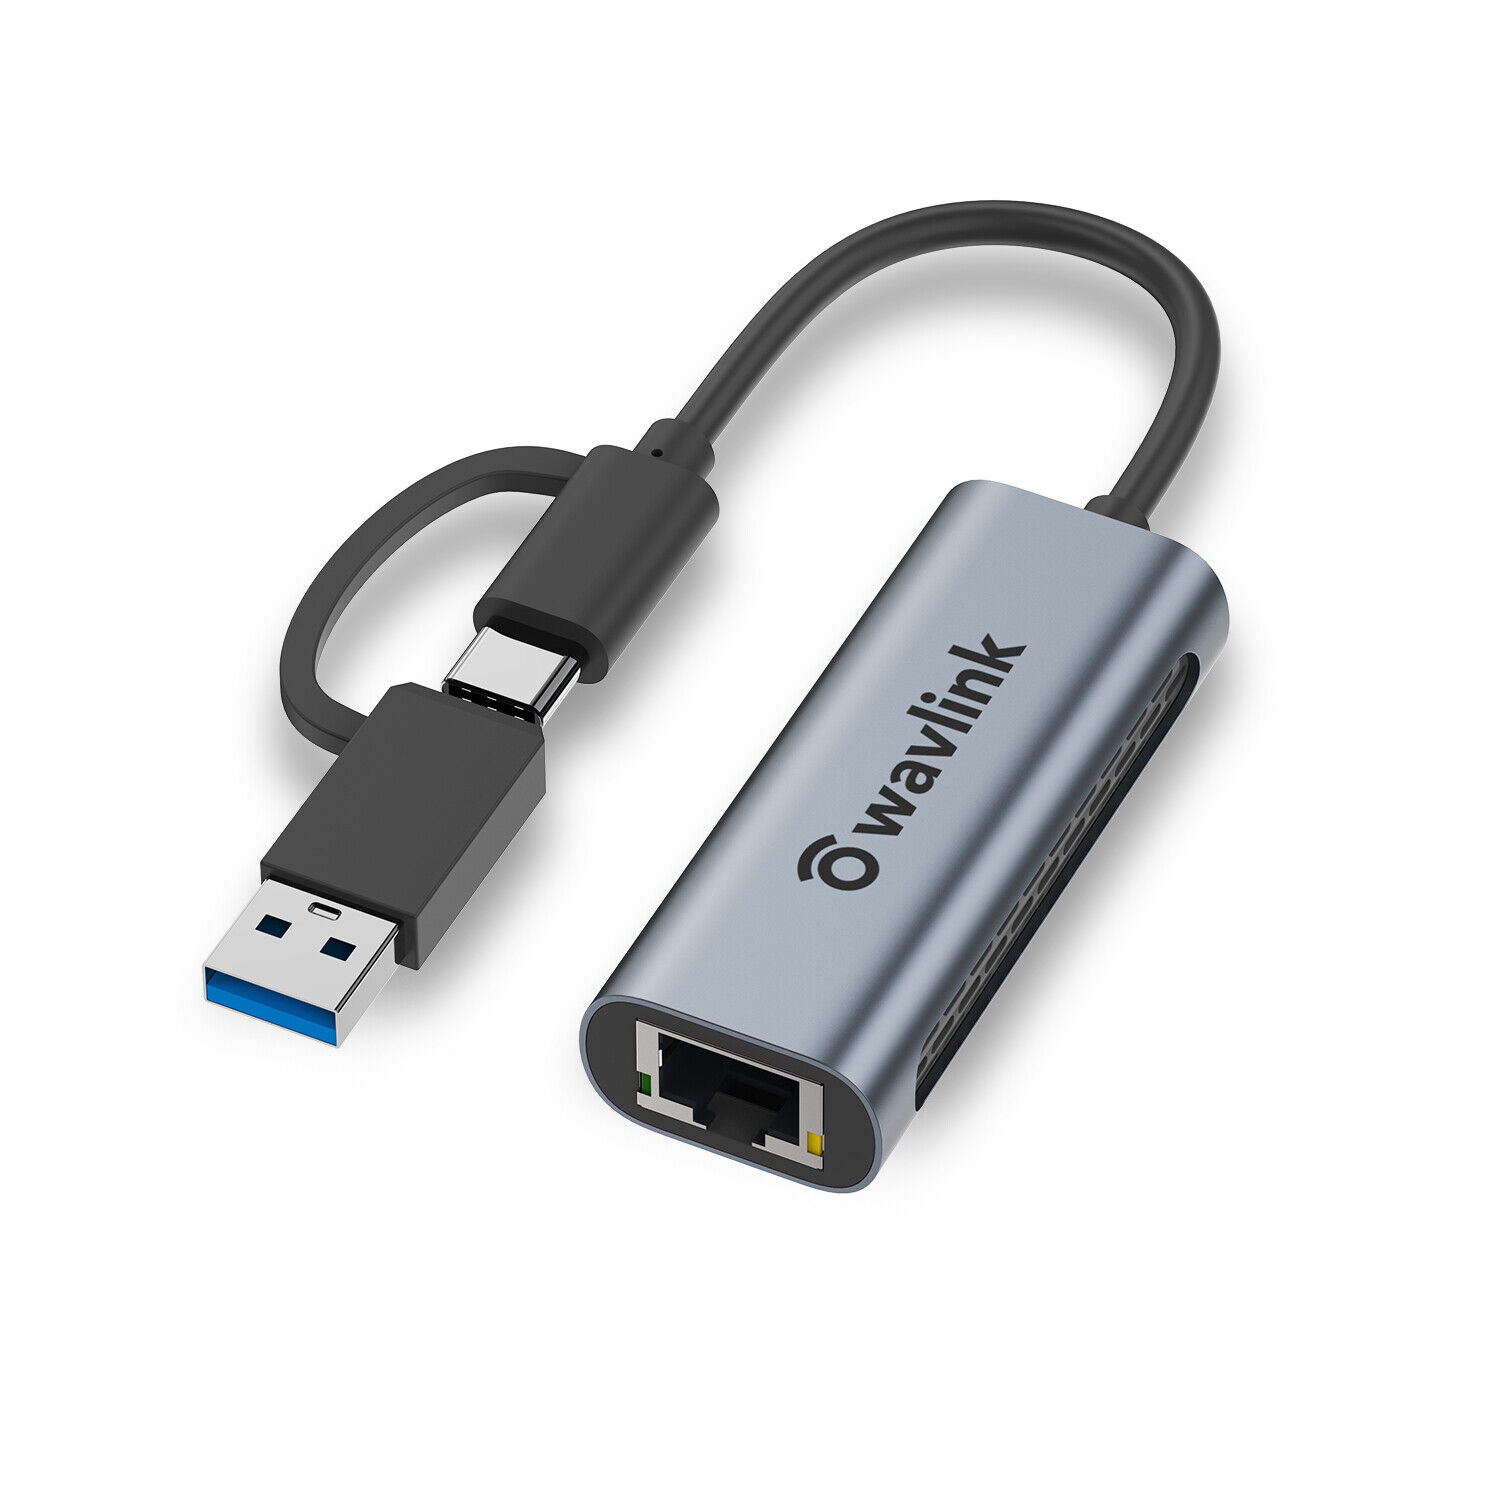 Wavlink USB Cables Hubs & Adapters 2in1 2.5G USB-C and USB 3.0 Ethernet Adapter